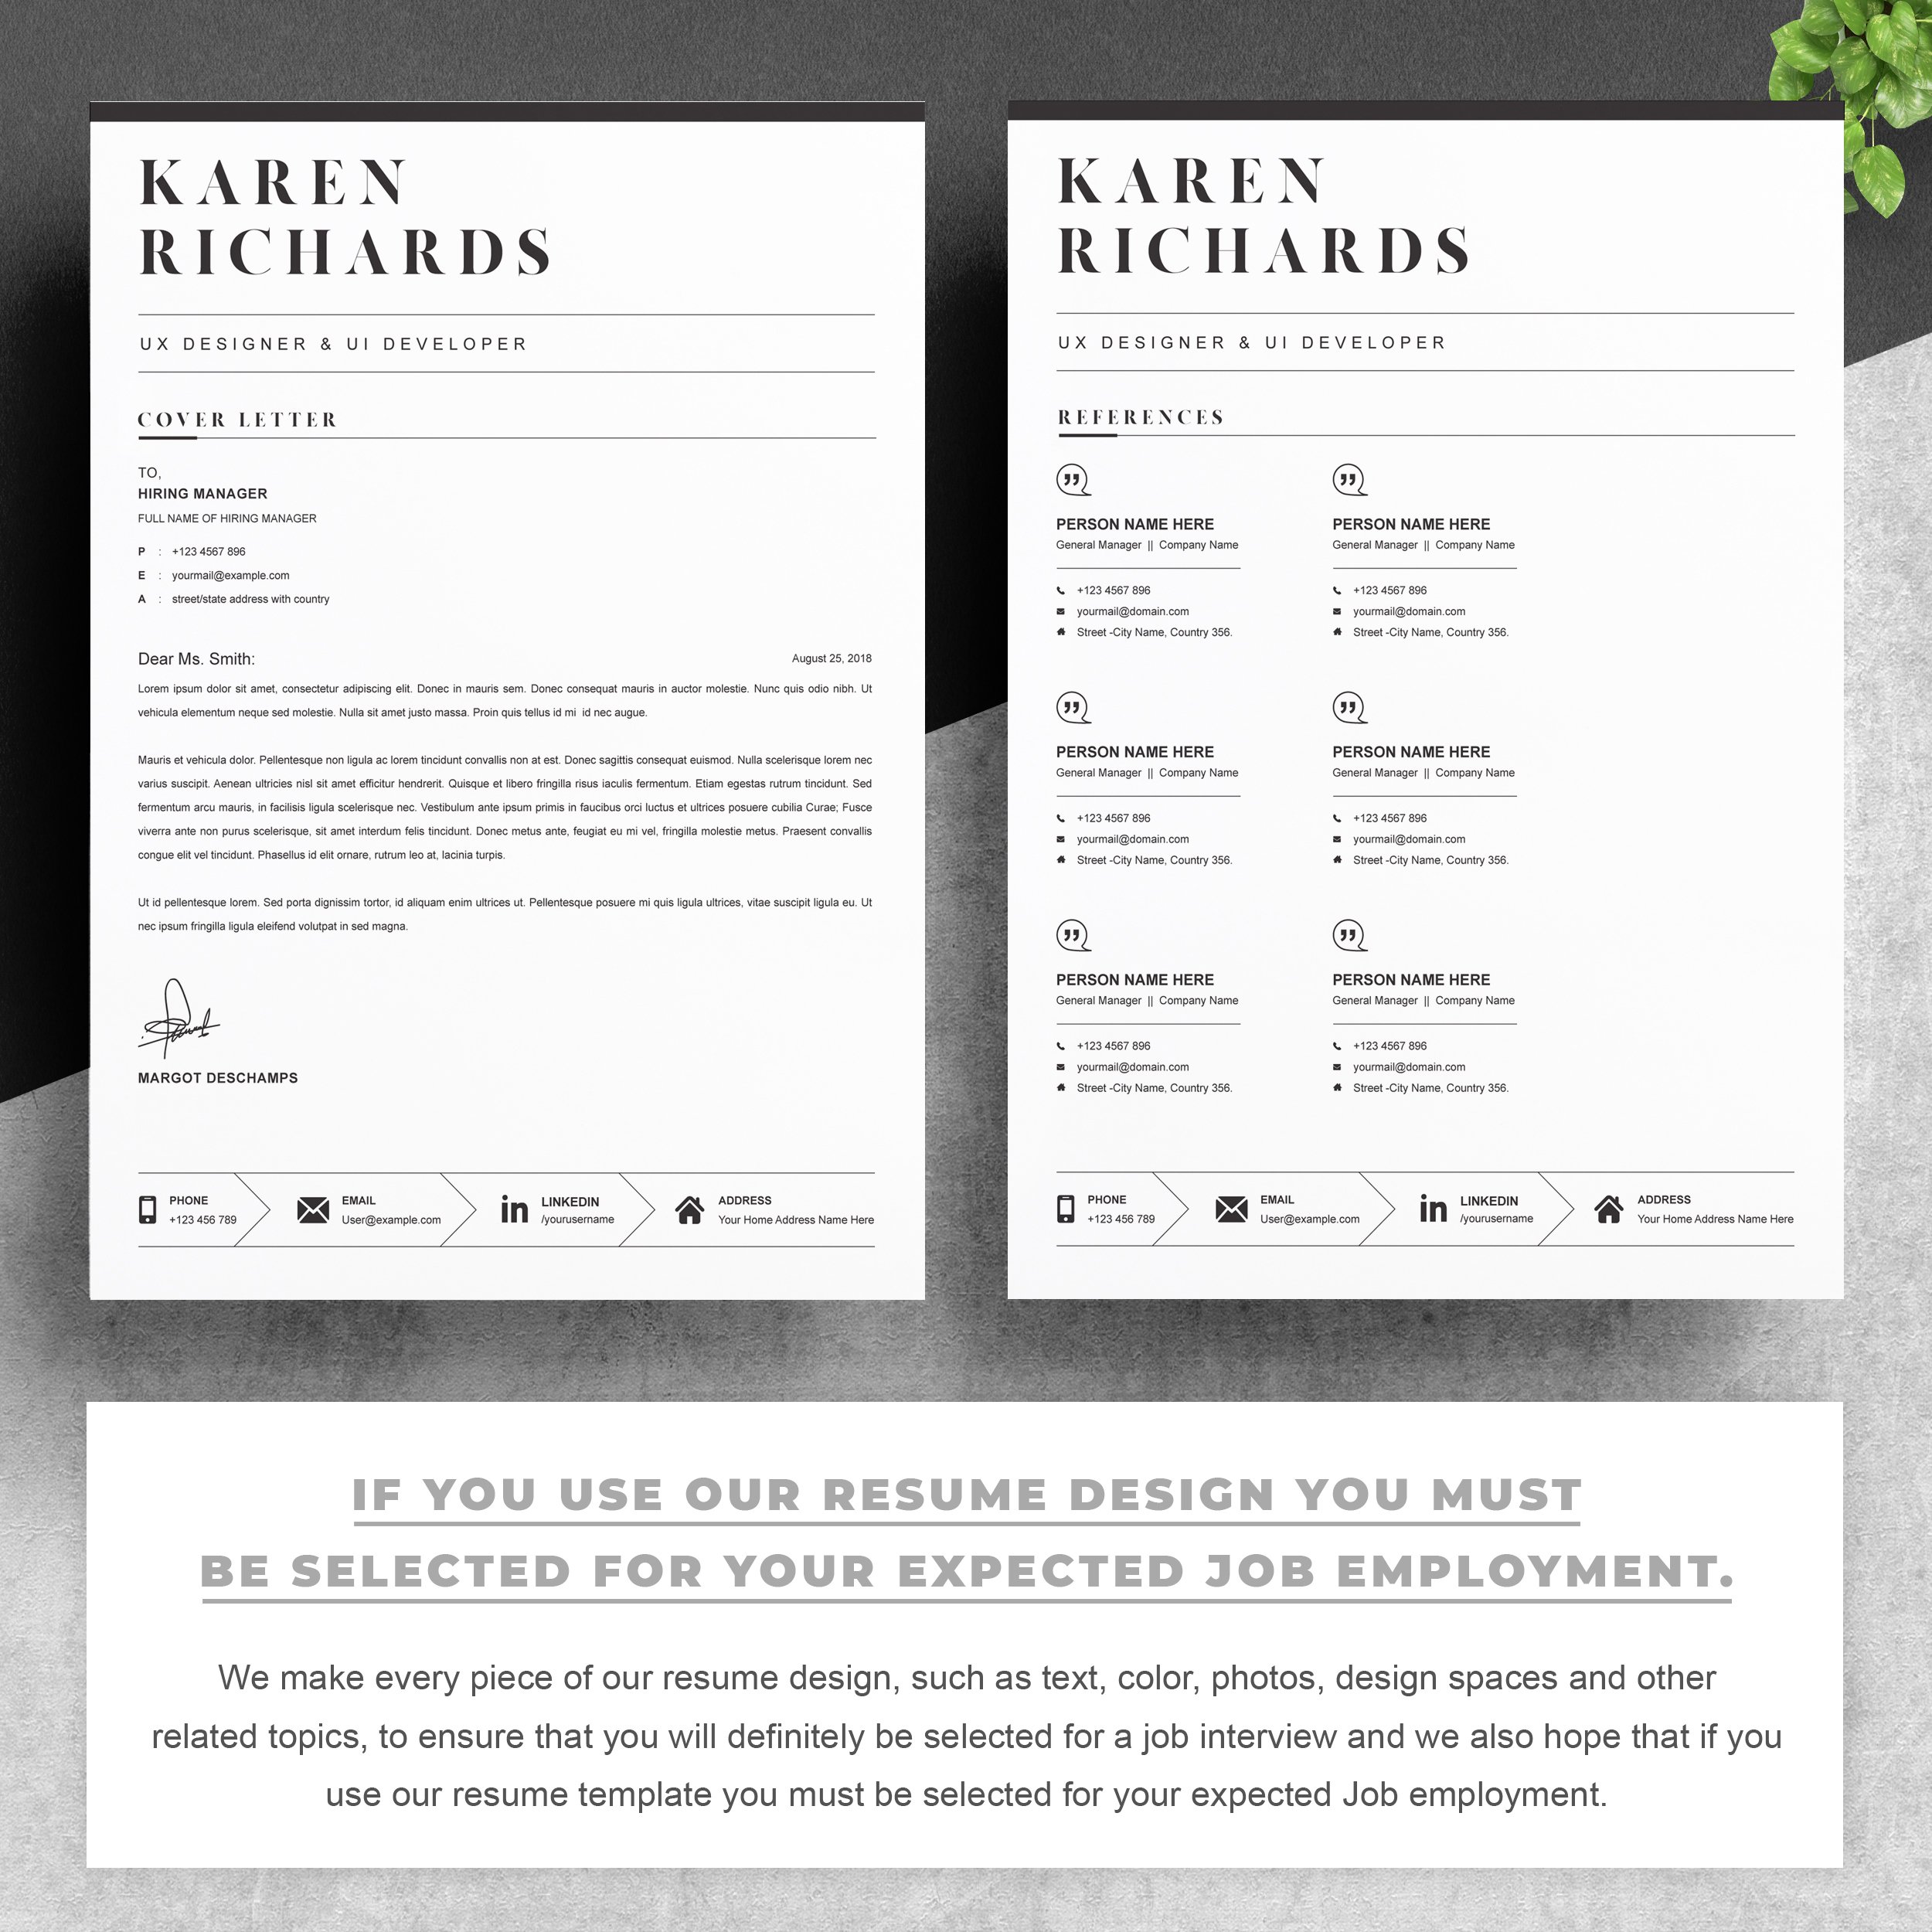 03 2 pages free resume design template copy 255